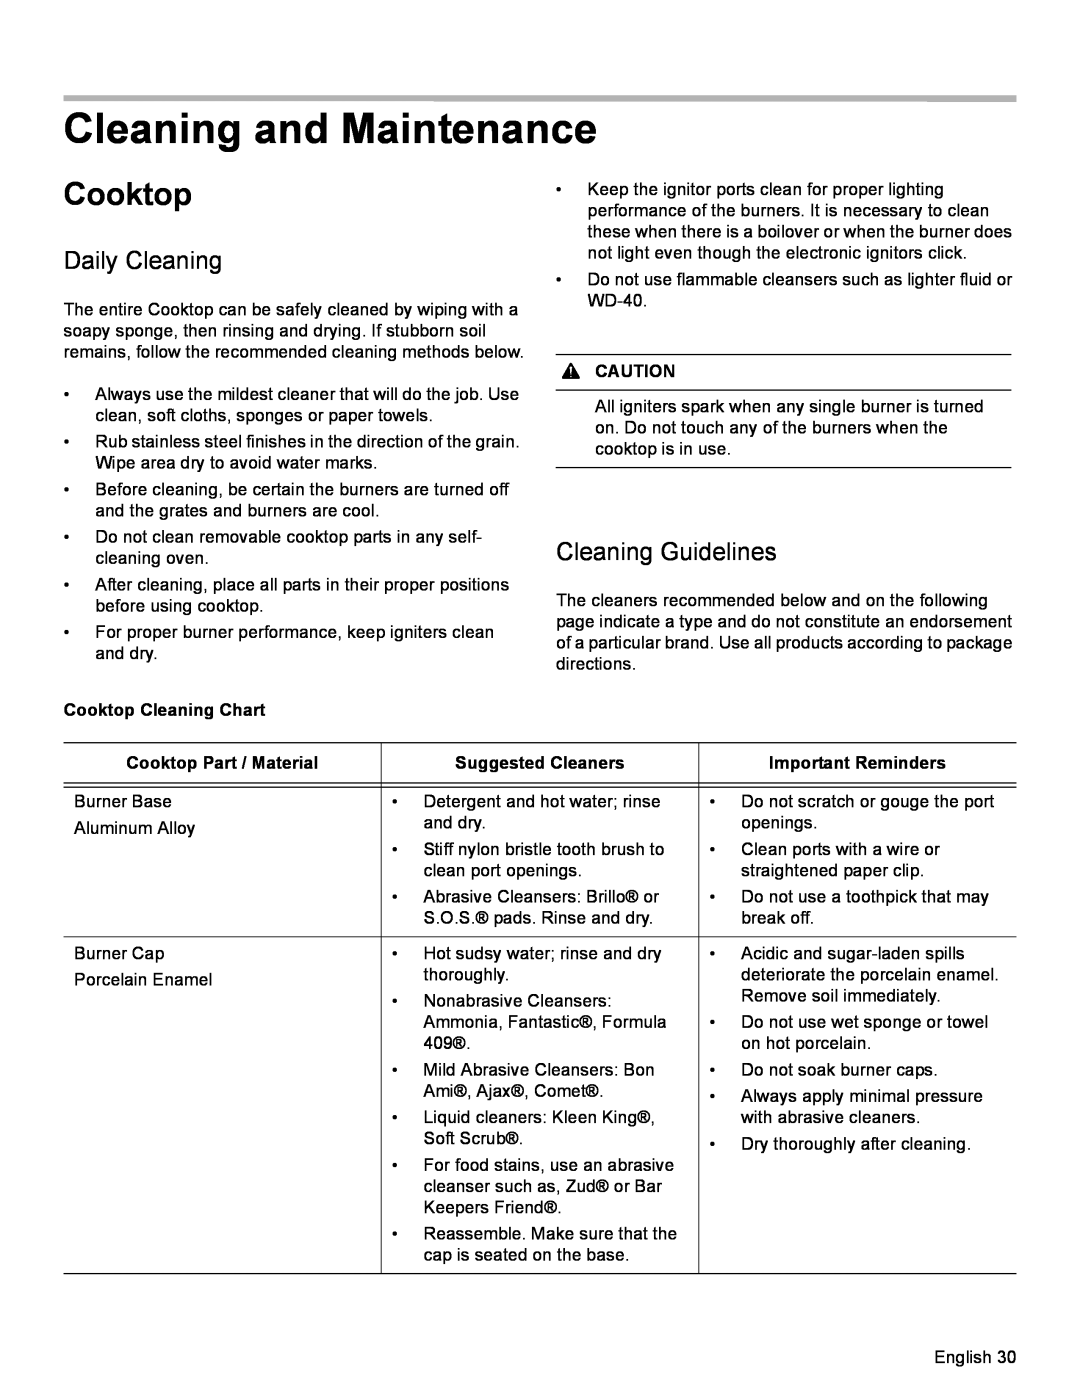 Bosch Appliances HDI8054U manual Cleaning and Maintenance, Daily Cleaning, Cleaning Guidelines, Cooktop Cleaning Chart 